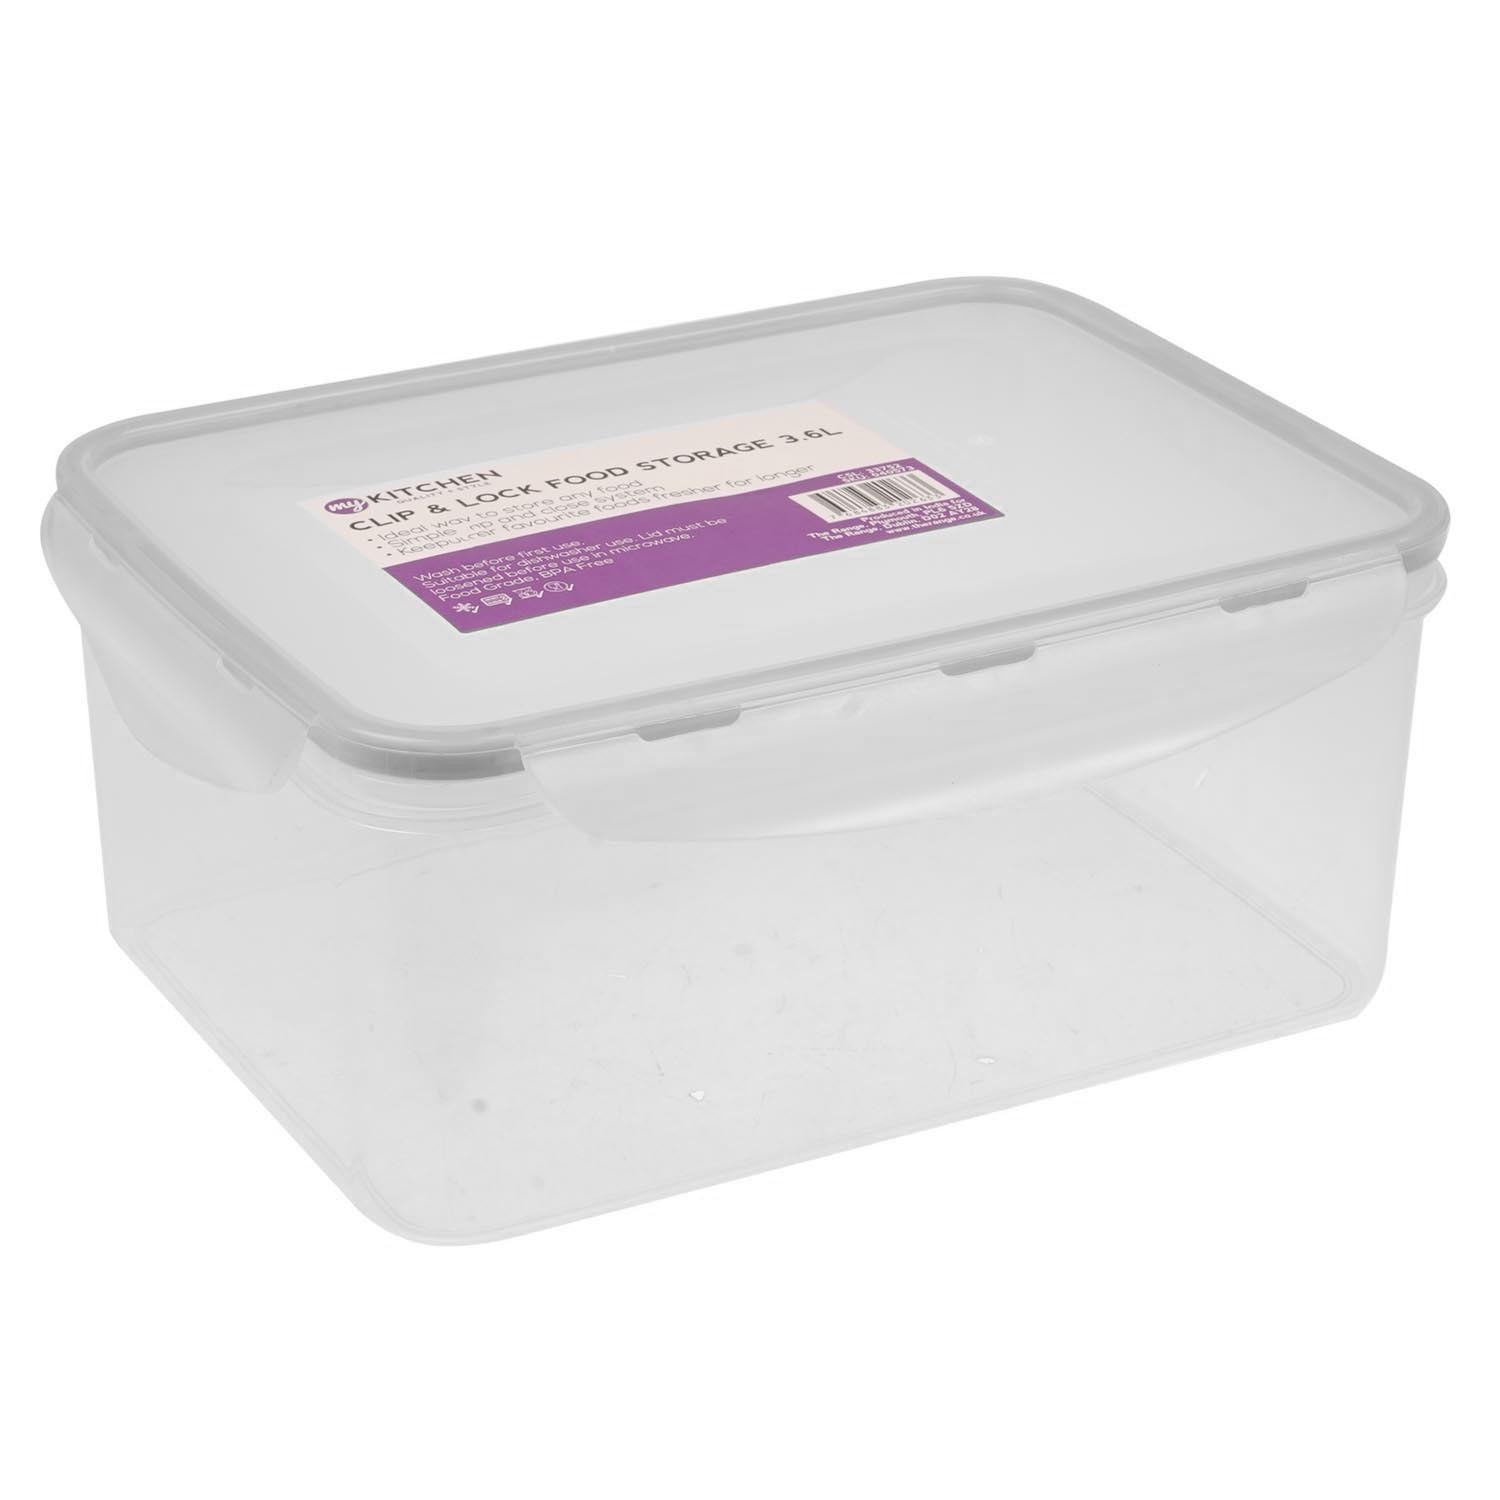 My Kitchen 3.6L Food Box with Clip and Lock Lid Image